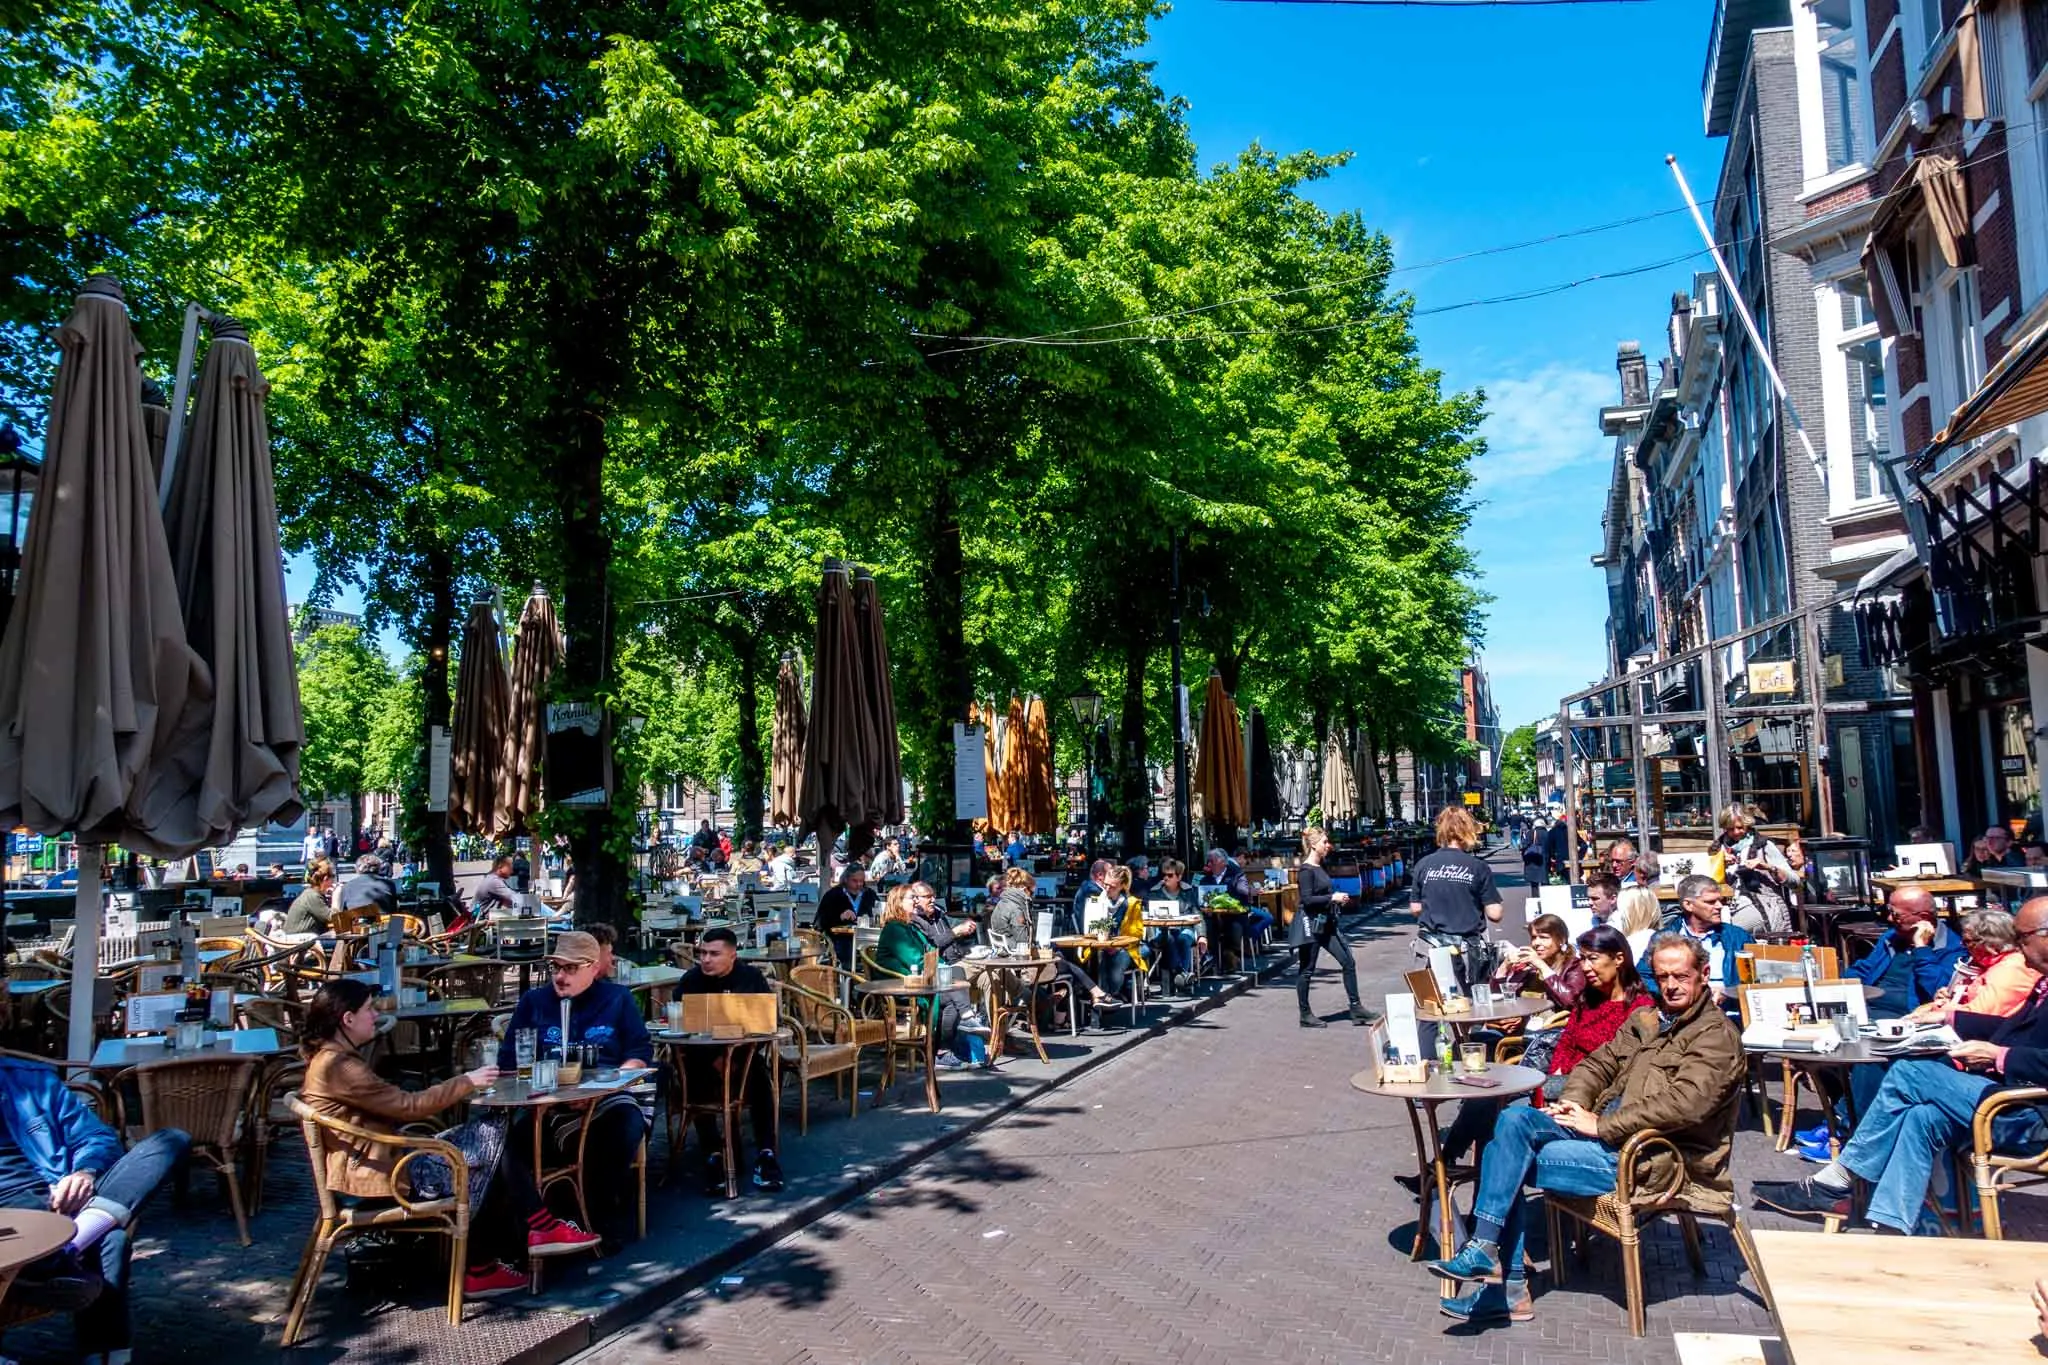 People at outdoor cafes on a tree-lined square